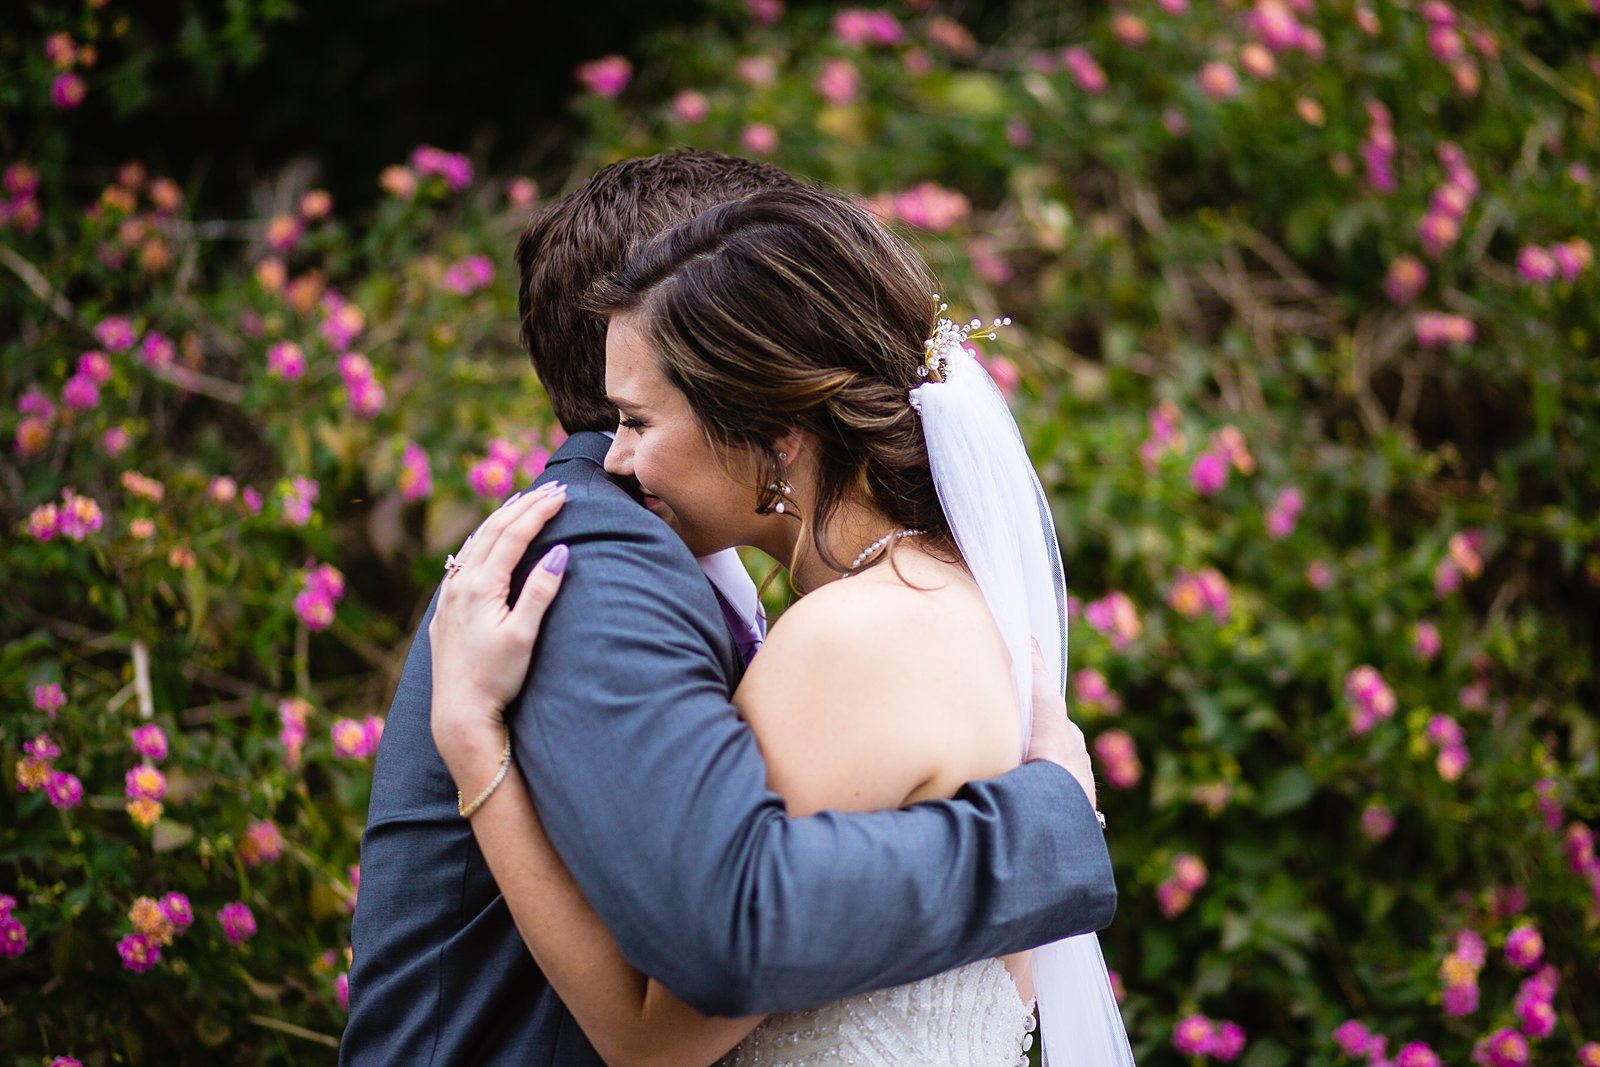 Bride and Groom share an intimate moment at their The Wright House wedding by Arizona wedding photographer PMA Photography.